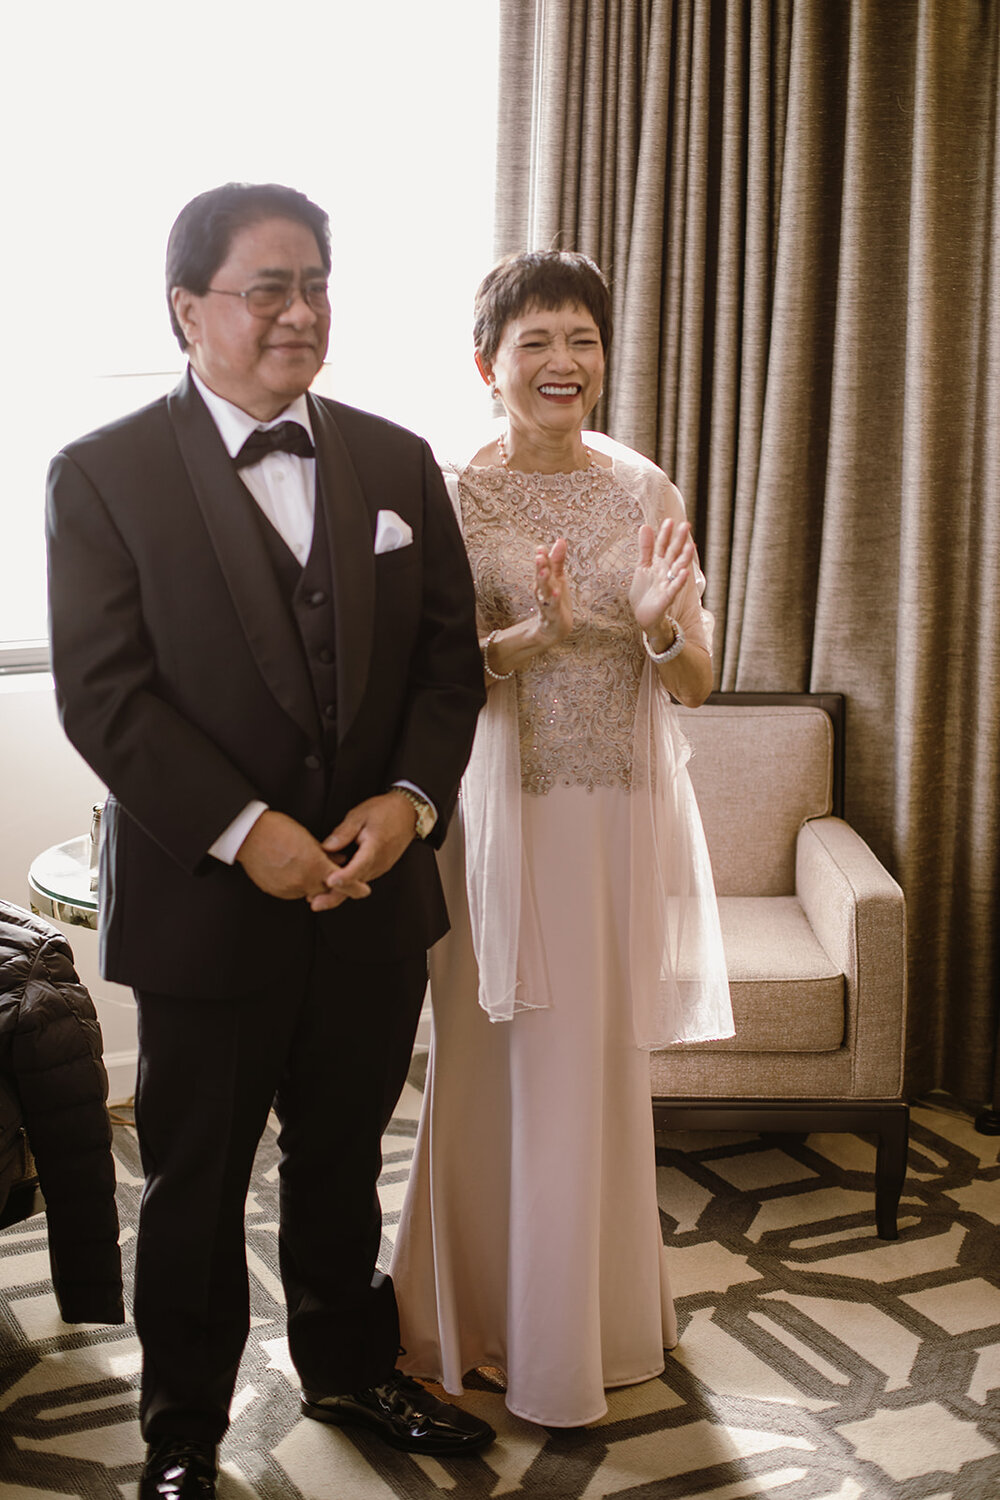  First look with parents | Black tie wedding with a red tux and custom Anne Barge gown | Romantic wedding at St. Bridget and The Omni Hotel in Richmond, VA. 